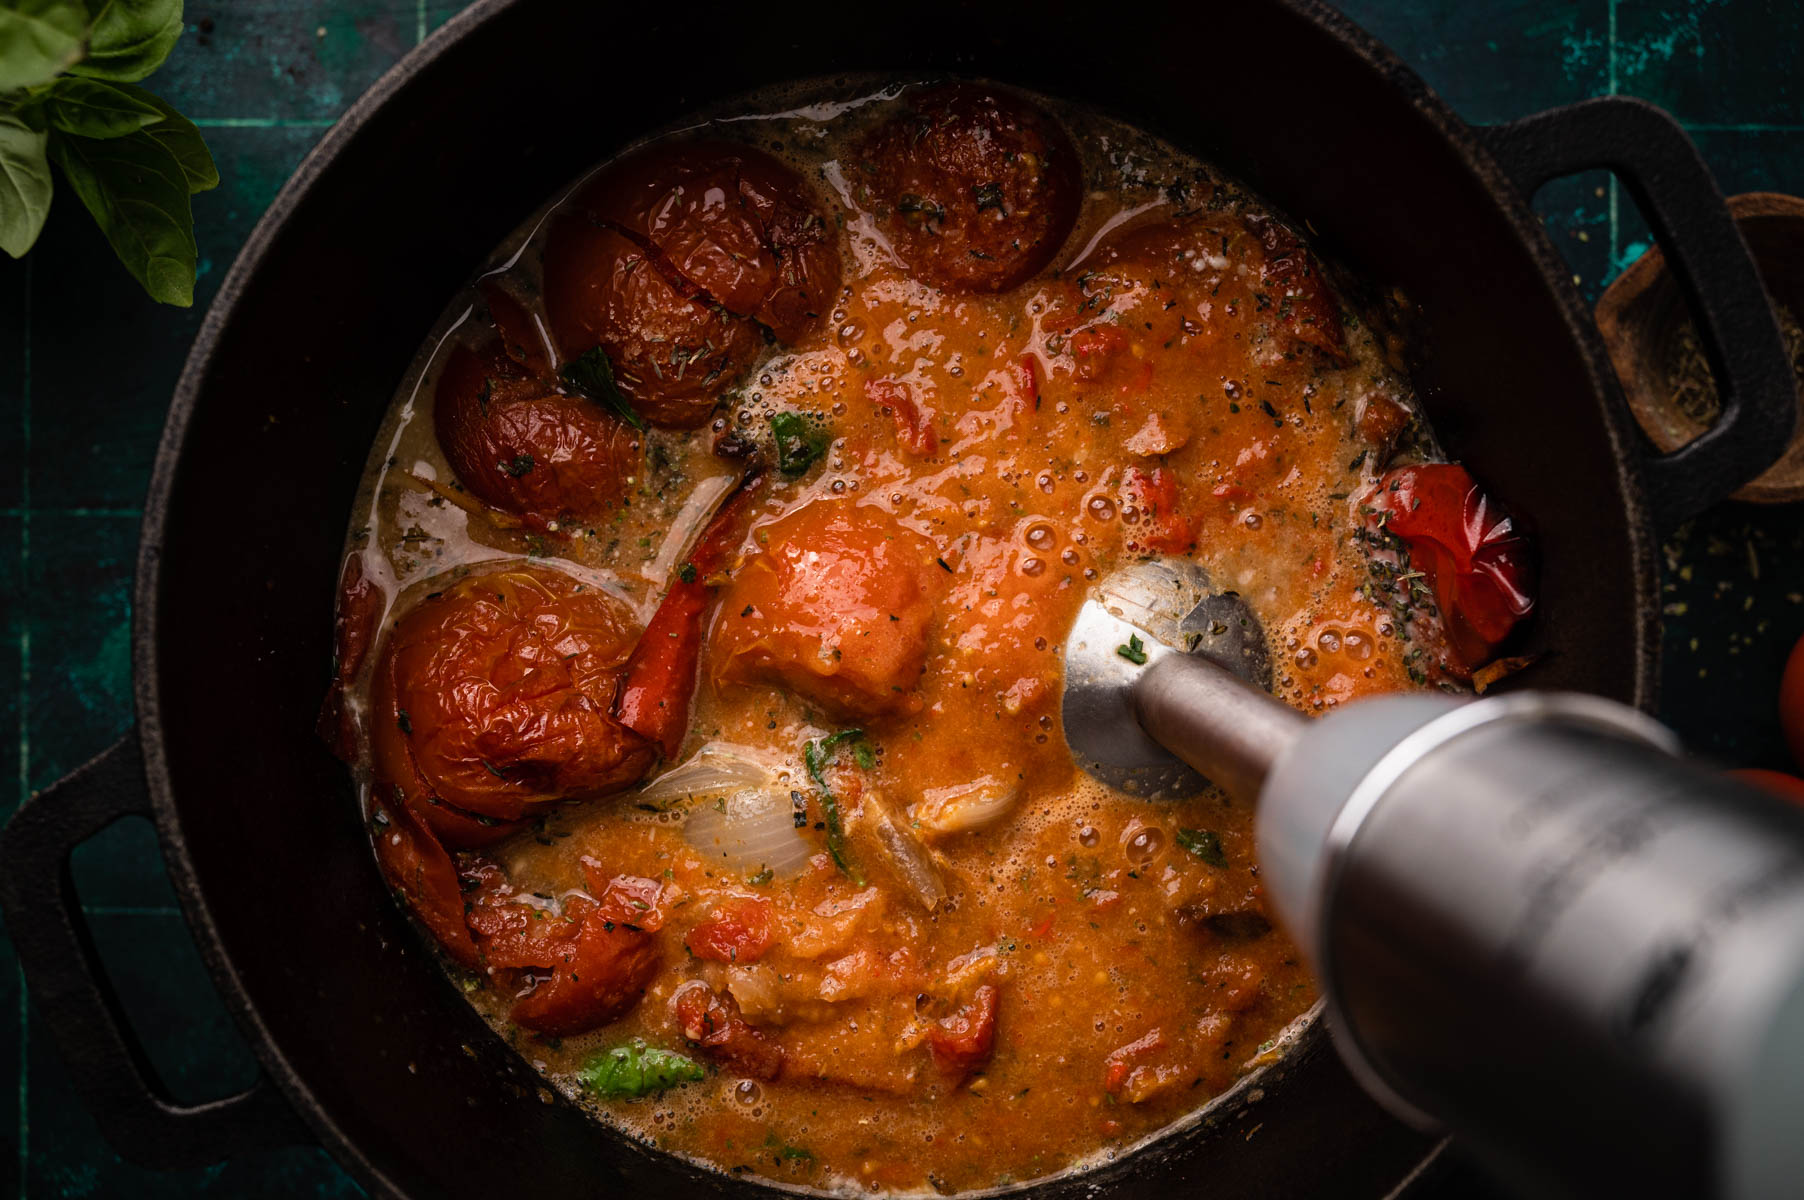 A skillet with simmering tomato sauce and roasted tomatoes, garnished with herbs, being stirred with a spoon.